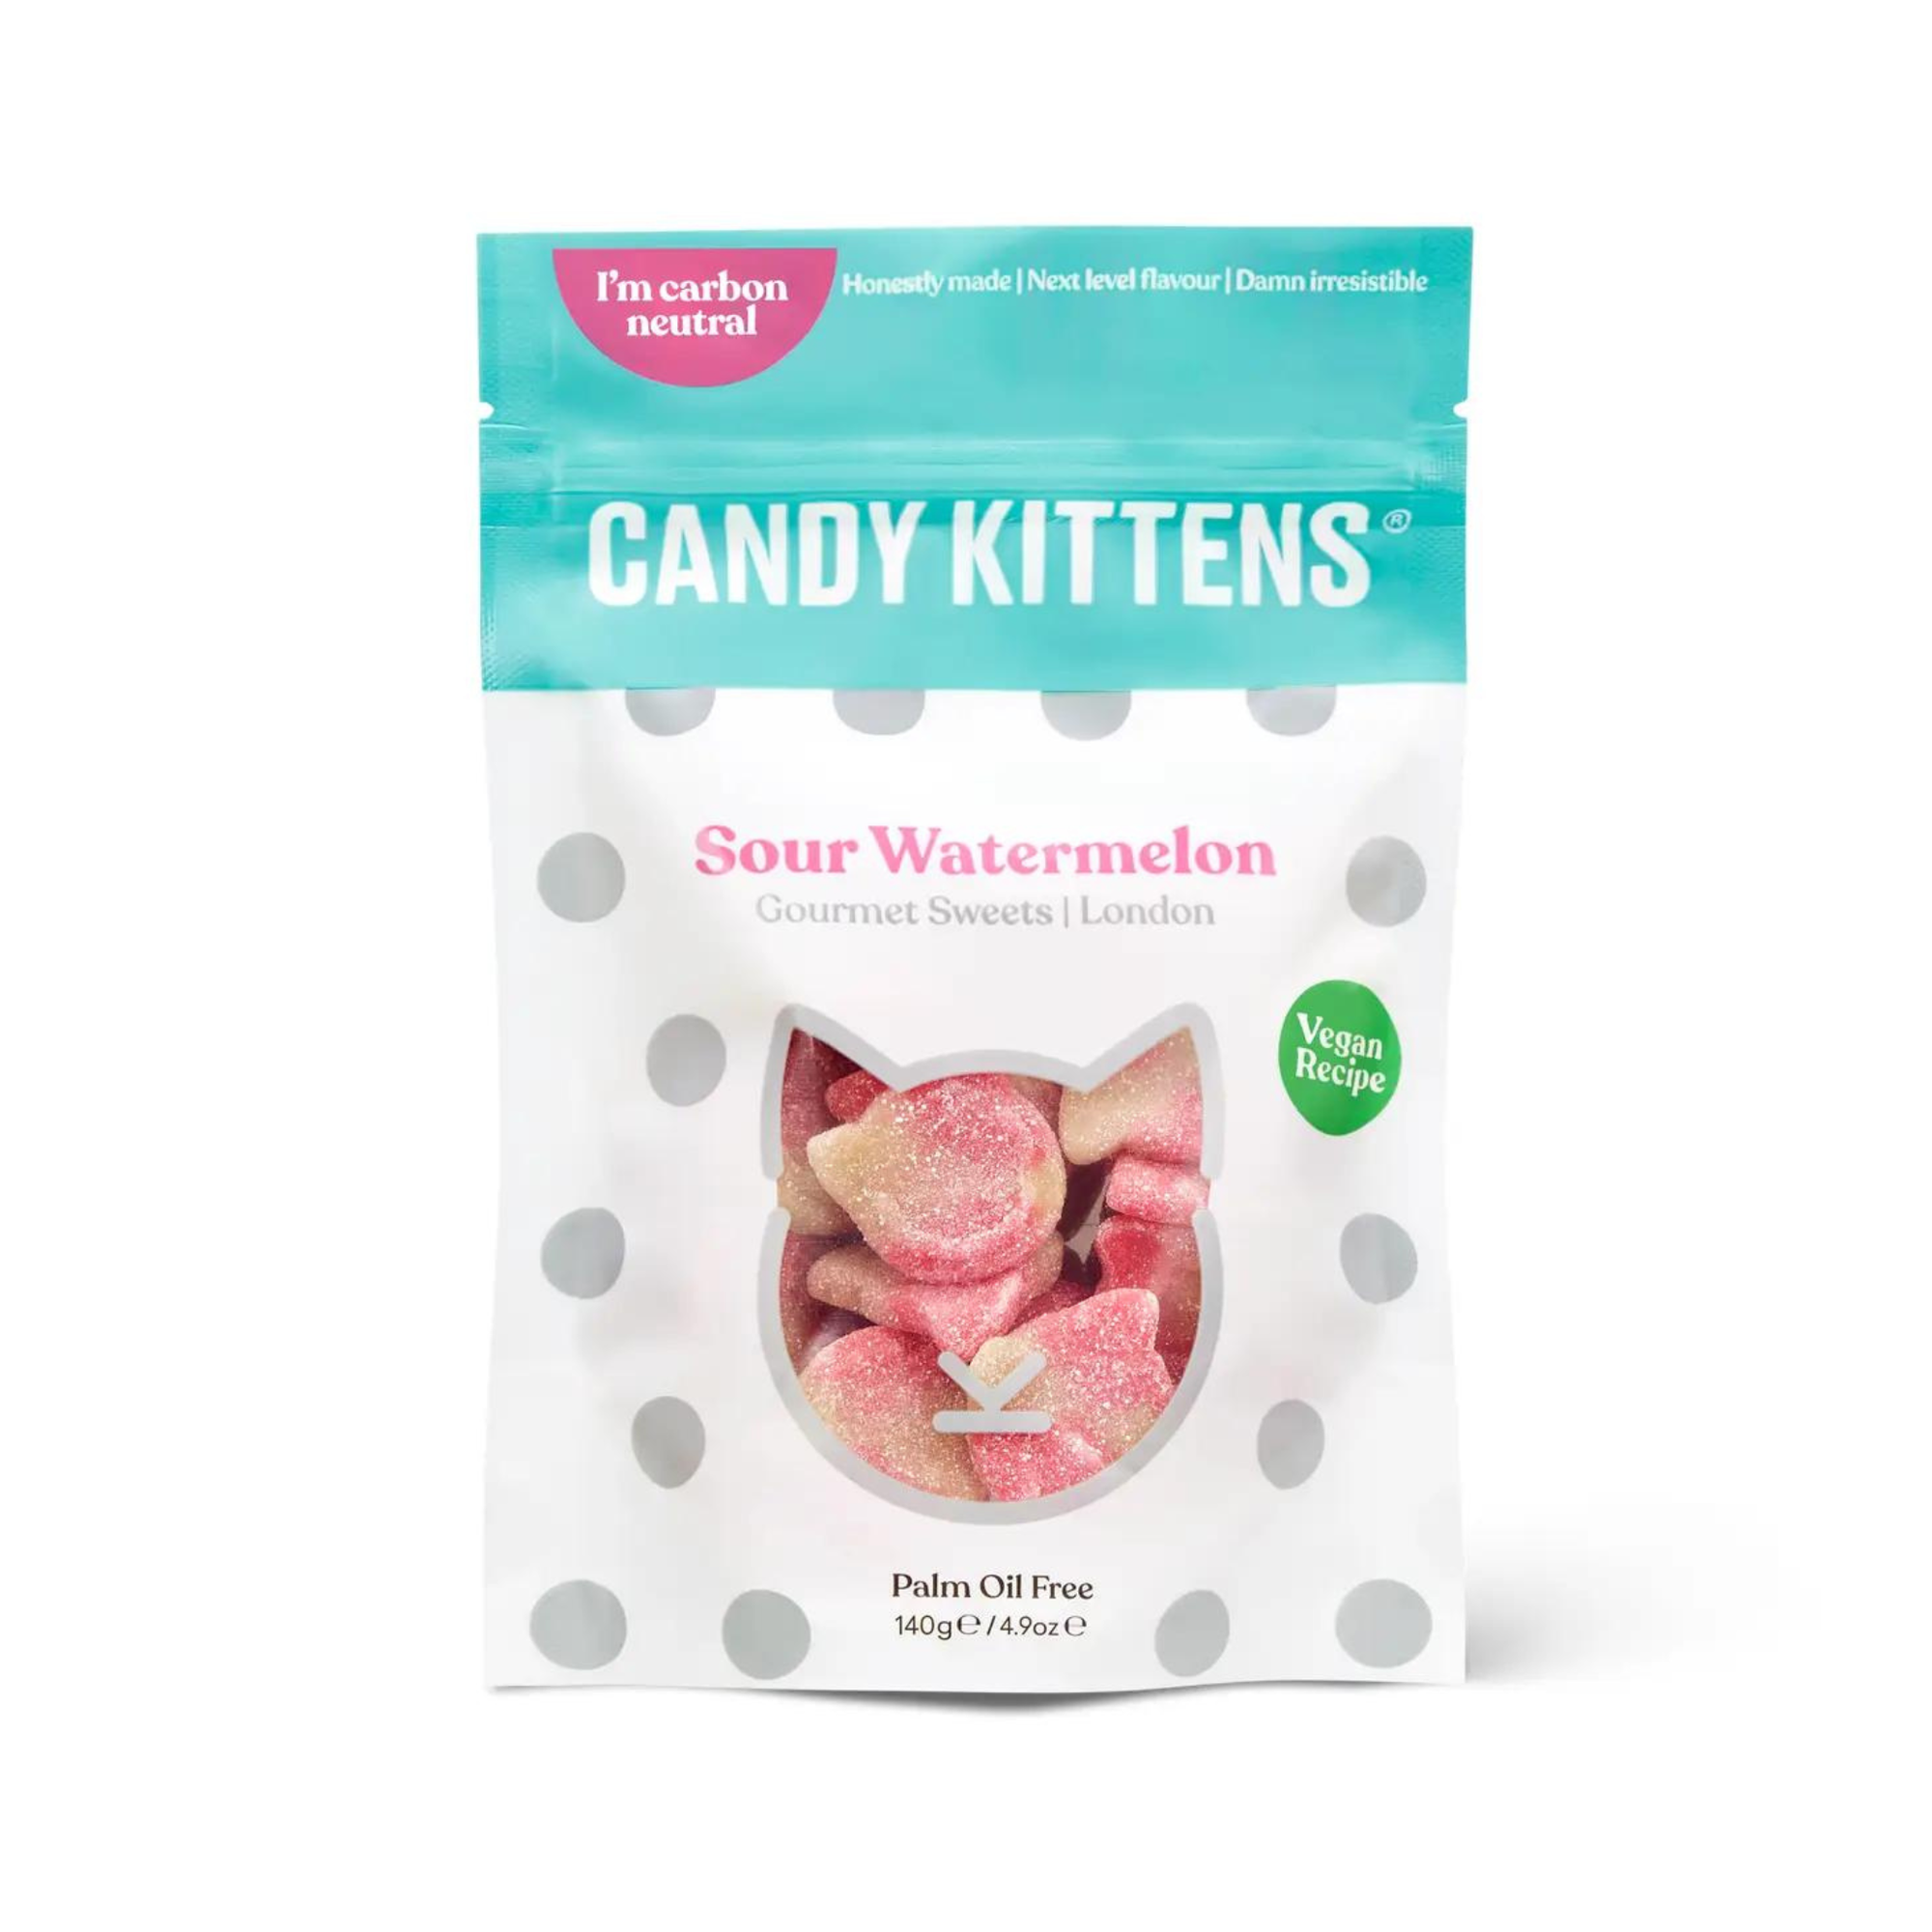 Candy Kittens Sour Watermelon